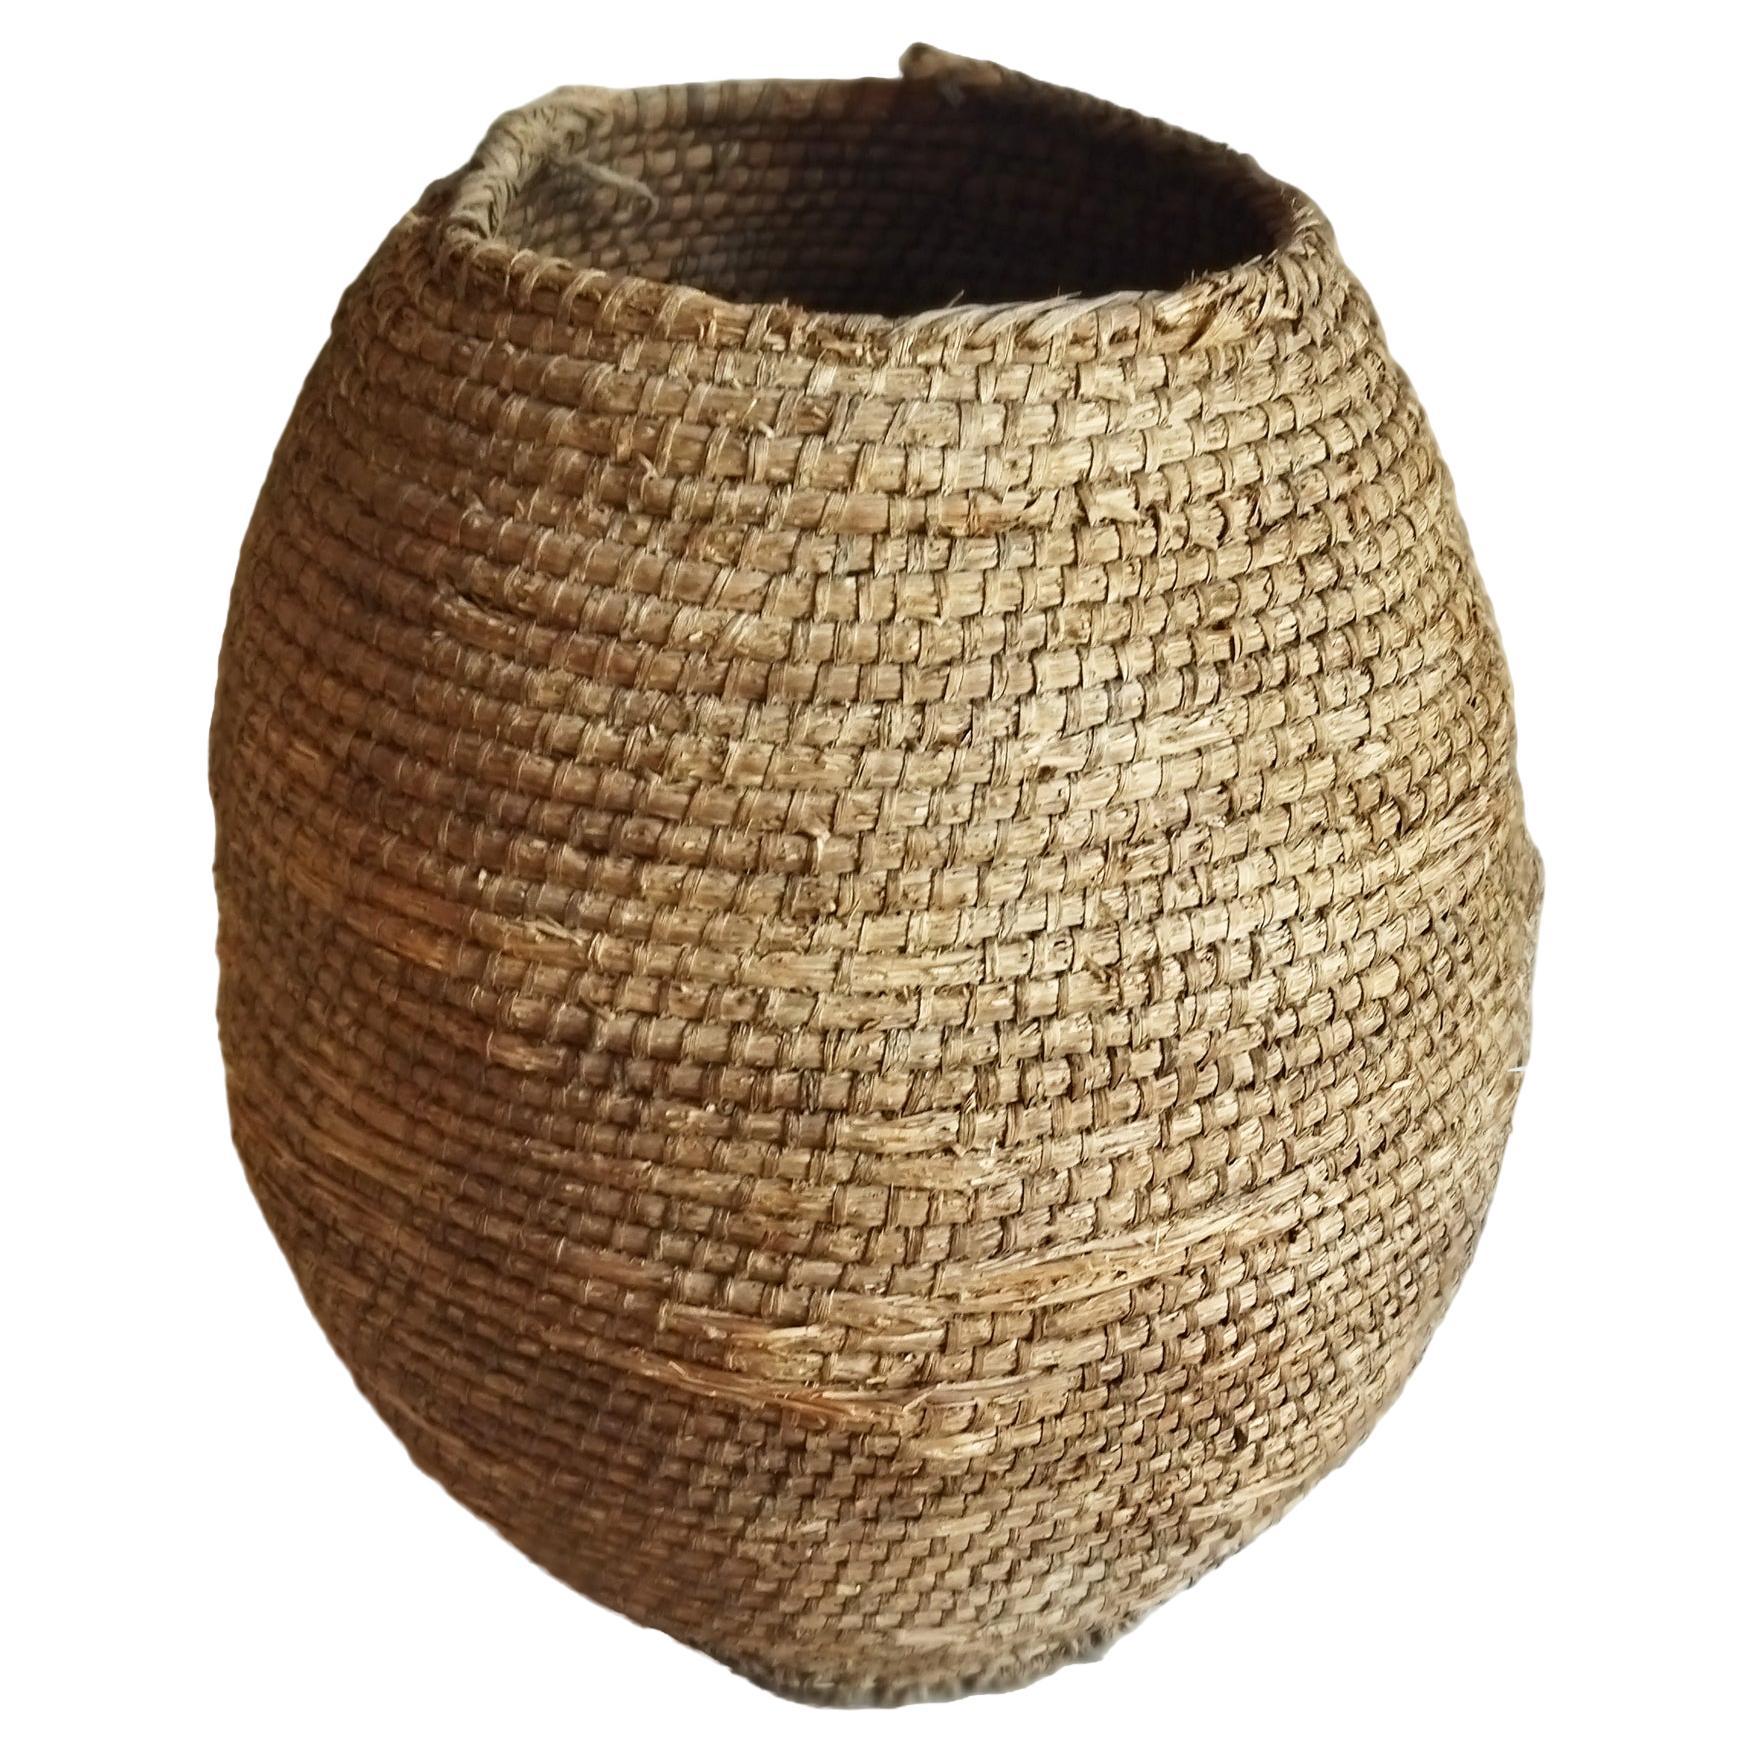 Beautiful old handmade piece
In central Spain, in this case specifically in Los Campos de Castilla and which was used to store wheat or grain and the harvest in general. His name in Spanish is Escriño
It is a large basket container made of straw,